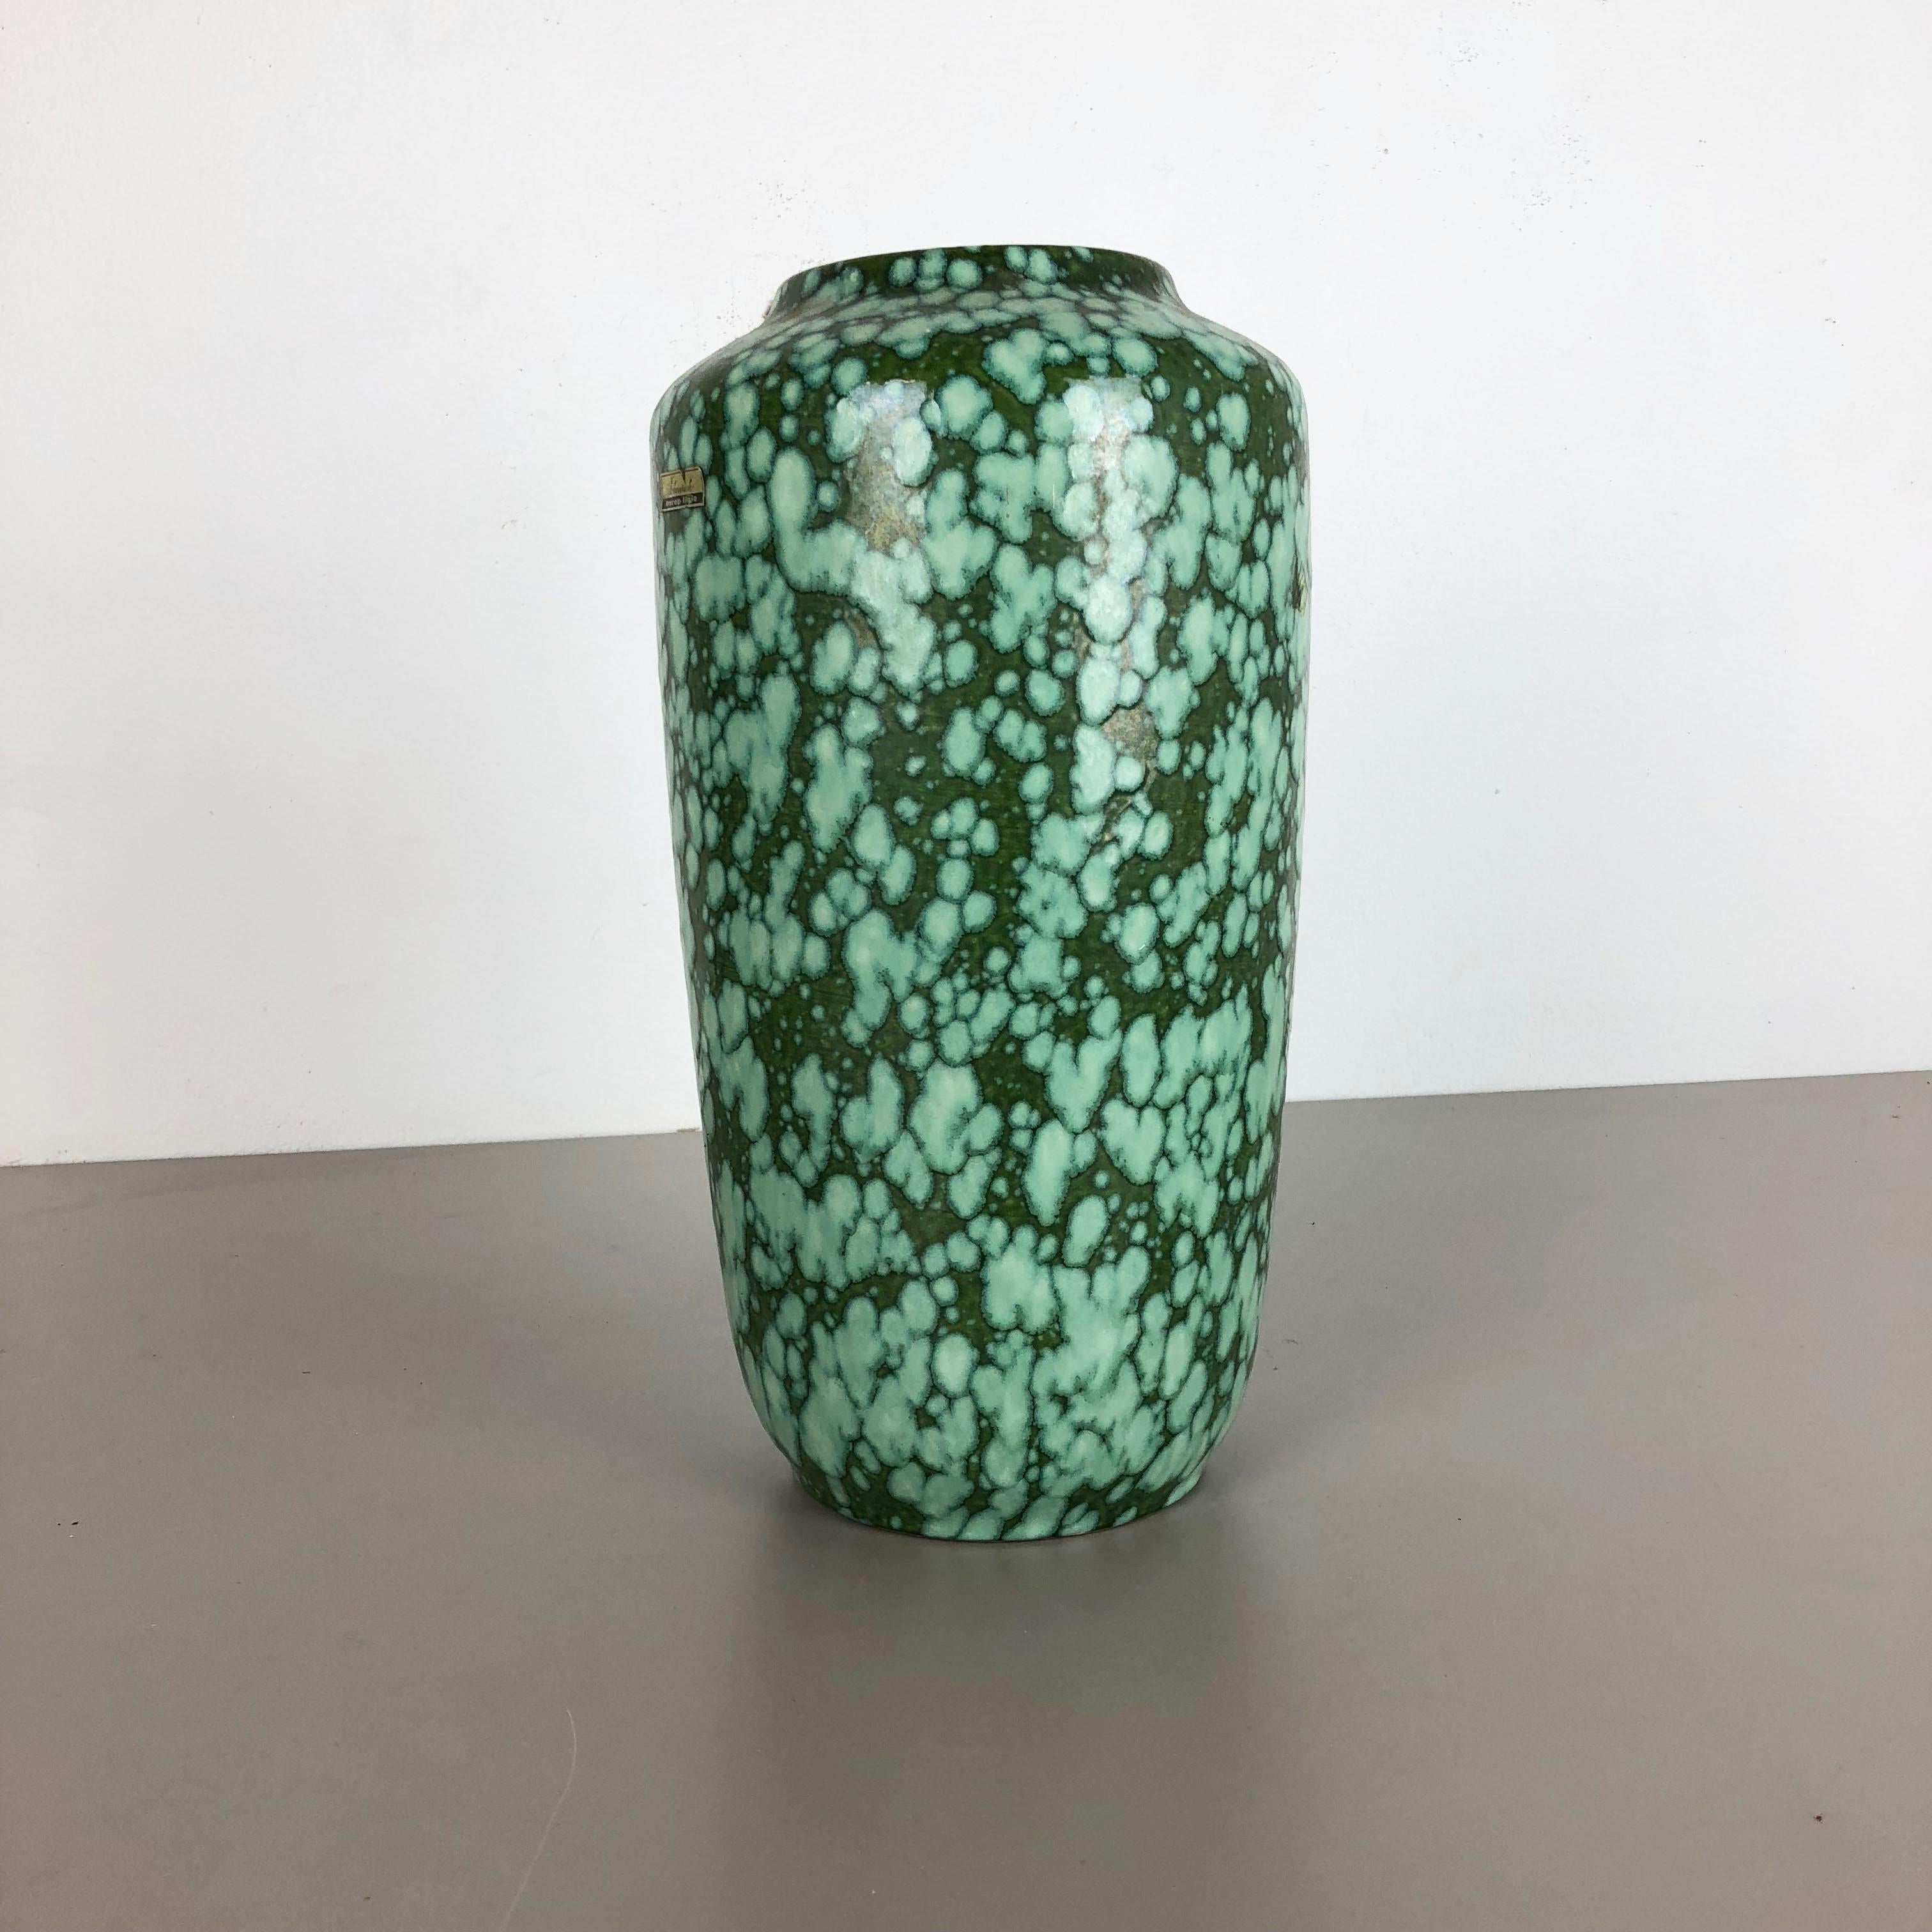 Article:

Fat lava art vase


Producer:

Scheurich, Germany


Design:

Nr. 517-38



Decade:

1970s


Description:

This original vintage vase was produced in the 1970s in Germany. It is made of porcelain pottery in fat lava